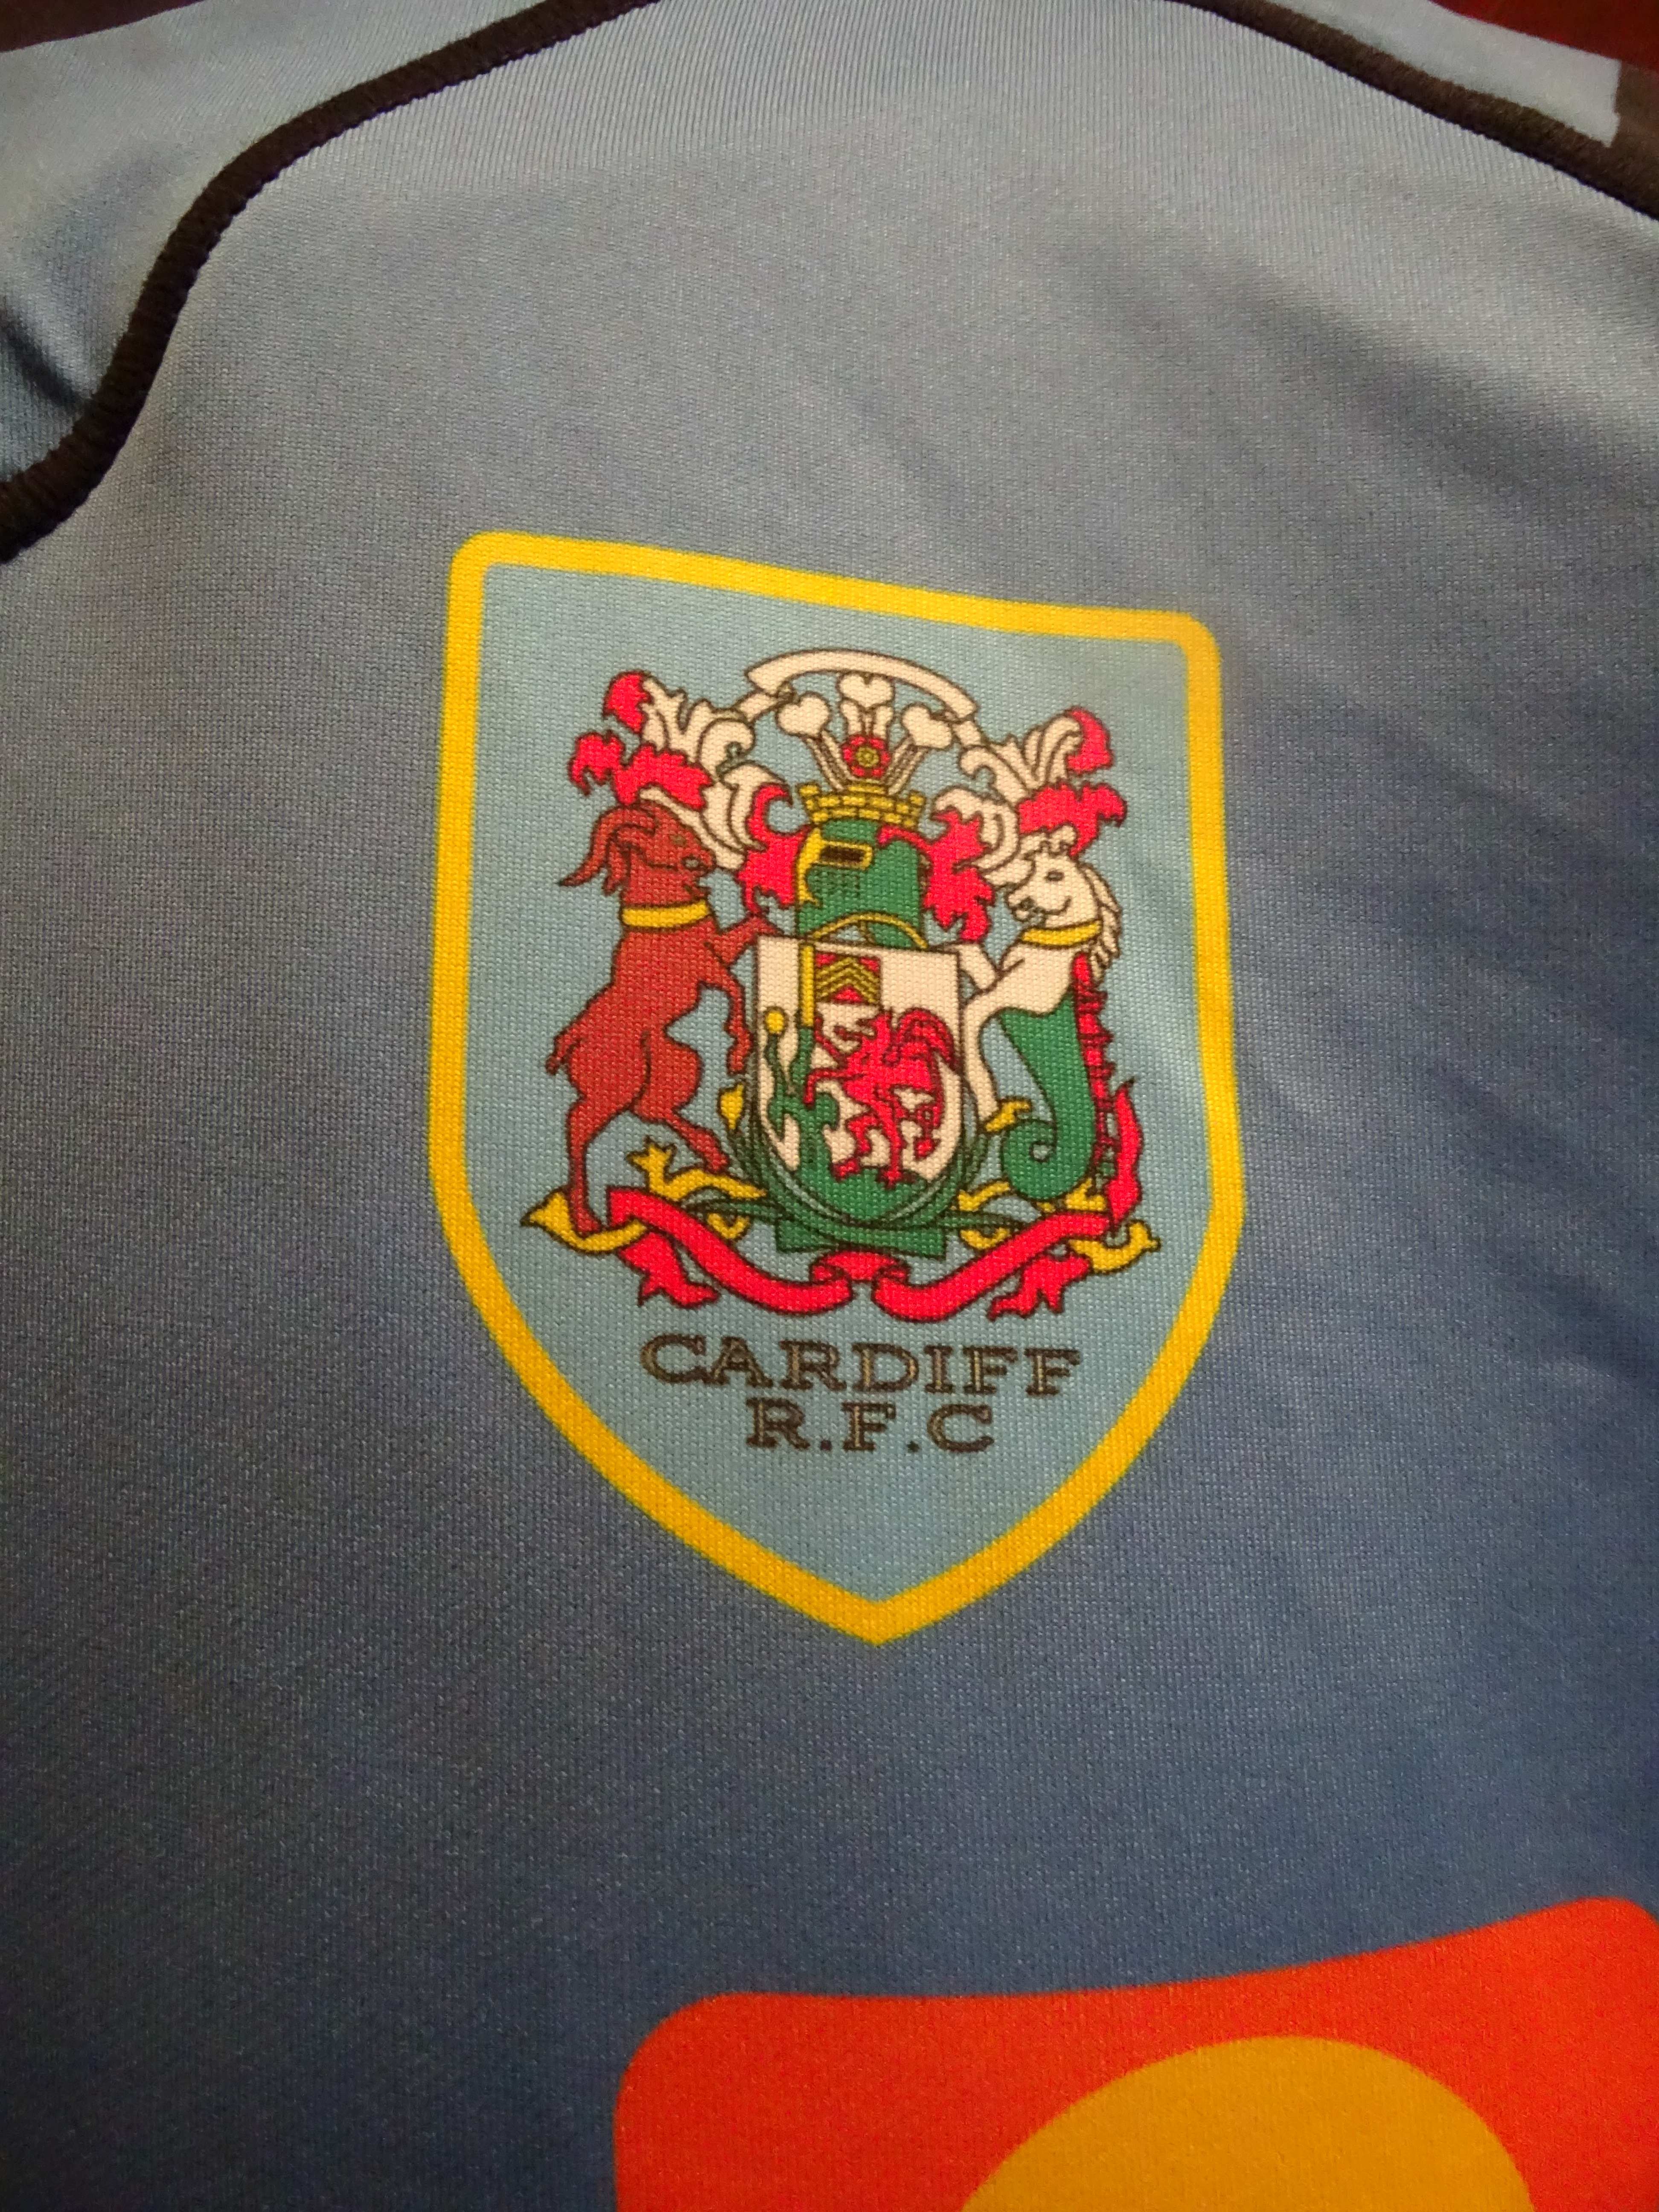 Jersey - Cardiff RFC 2016/17 | Cardiff Rugby Museum